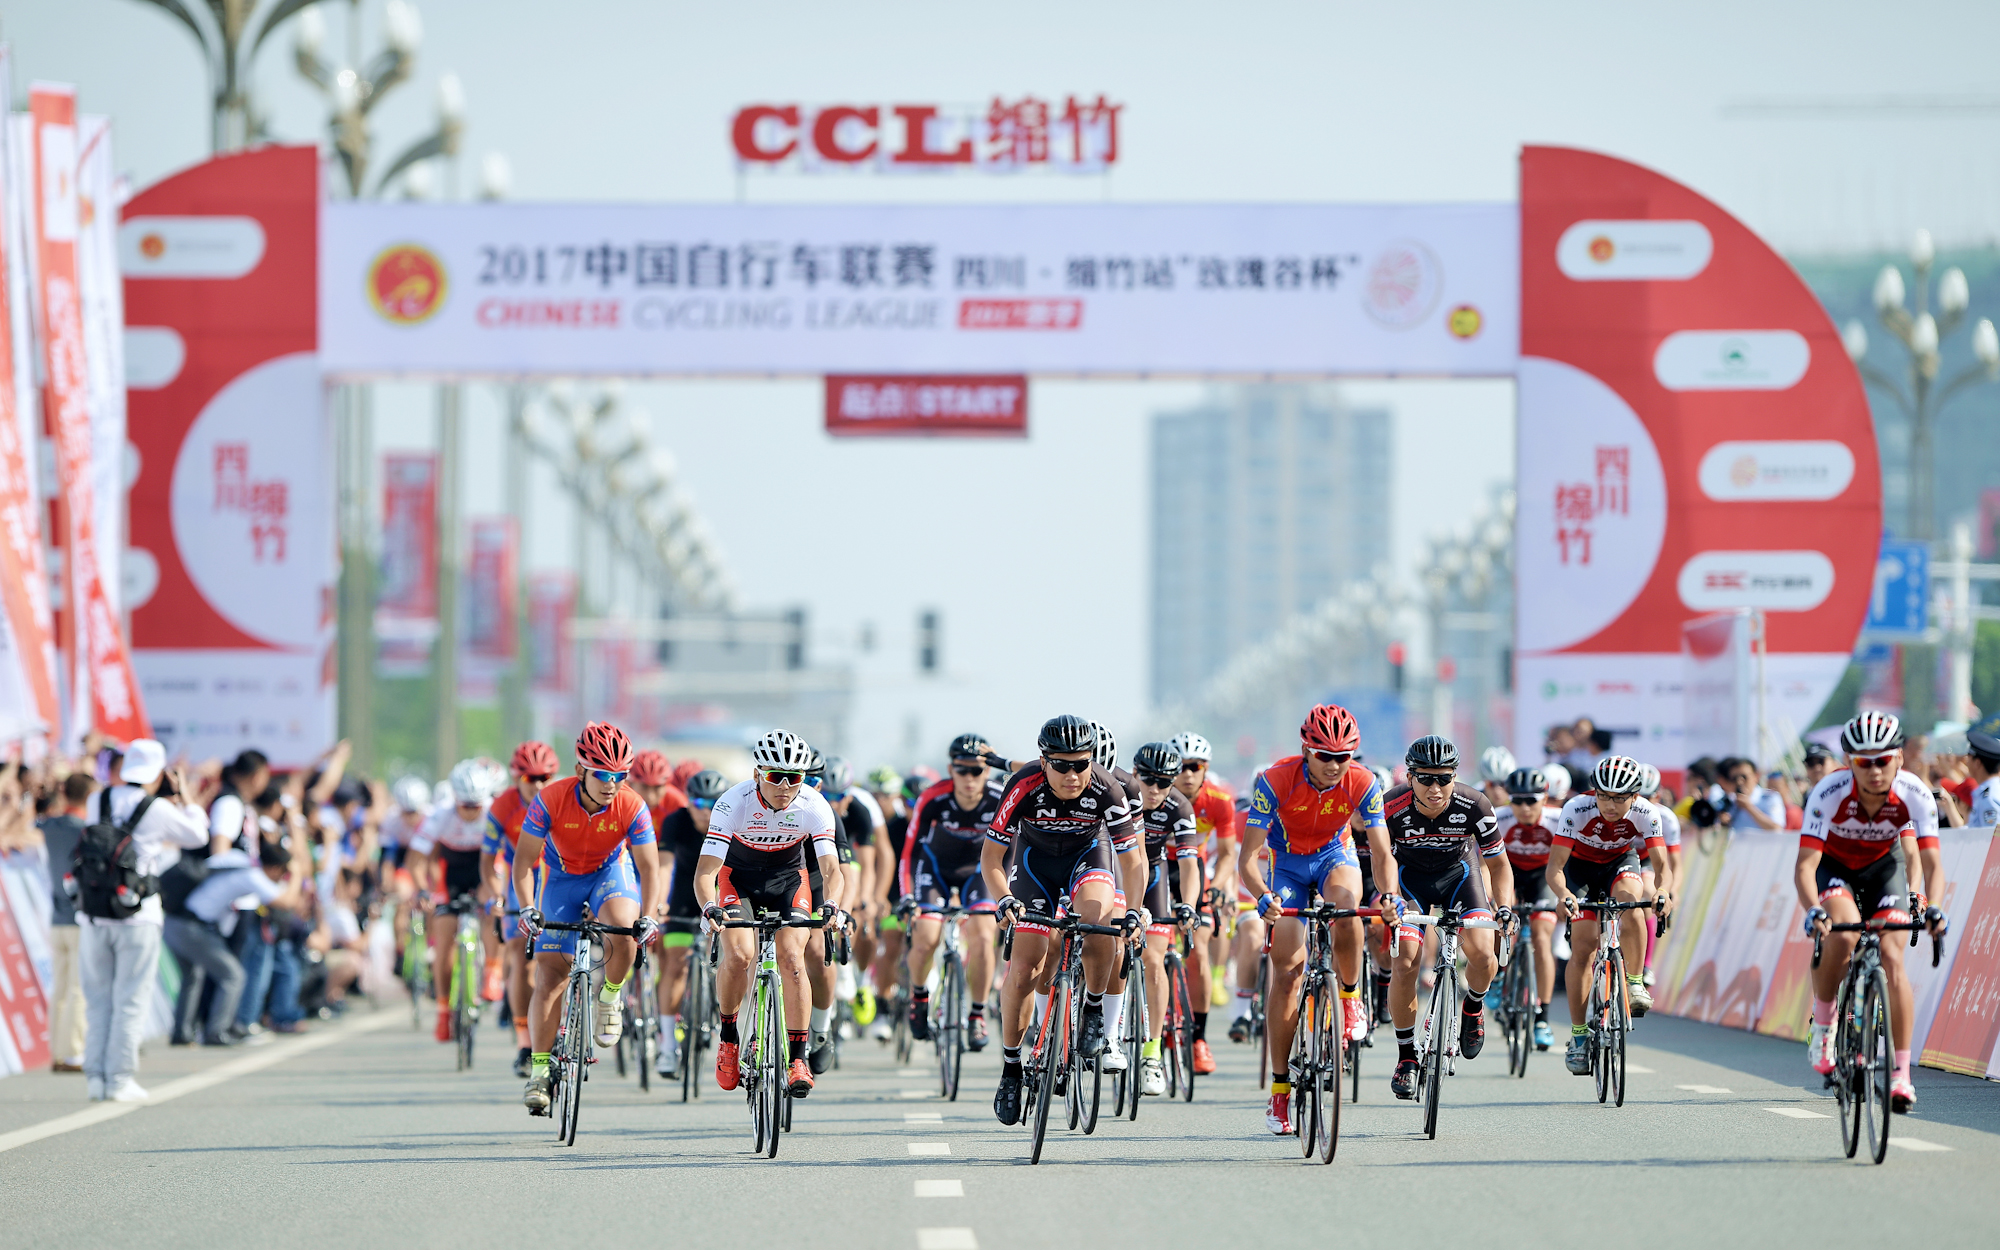 The 2017 Chinese Cycling League races kicks off on Friday May 26, in Mianzhu, southwest China's Sichuan Province. [Photo: Provided to China Plus]